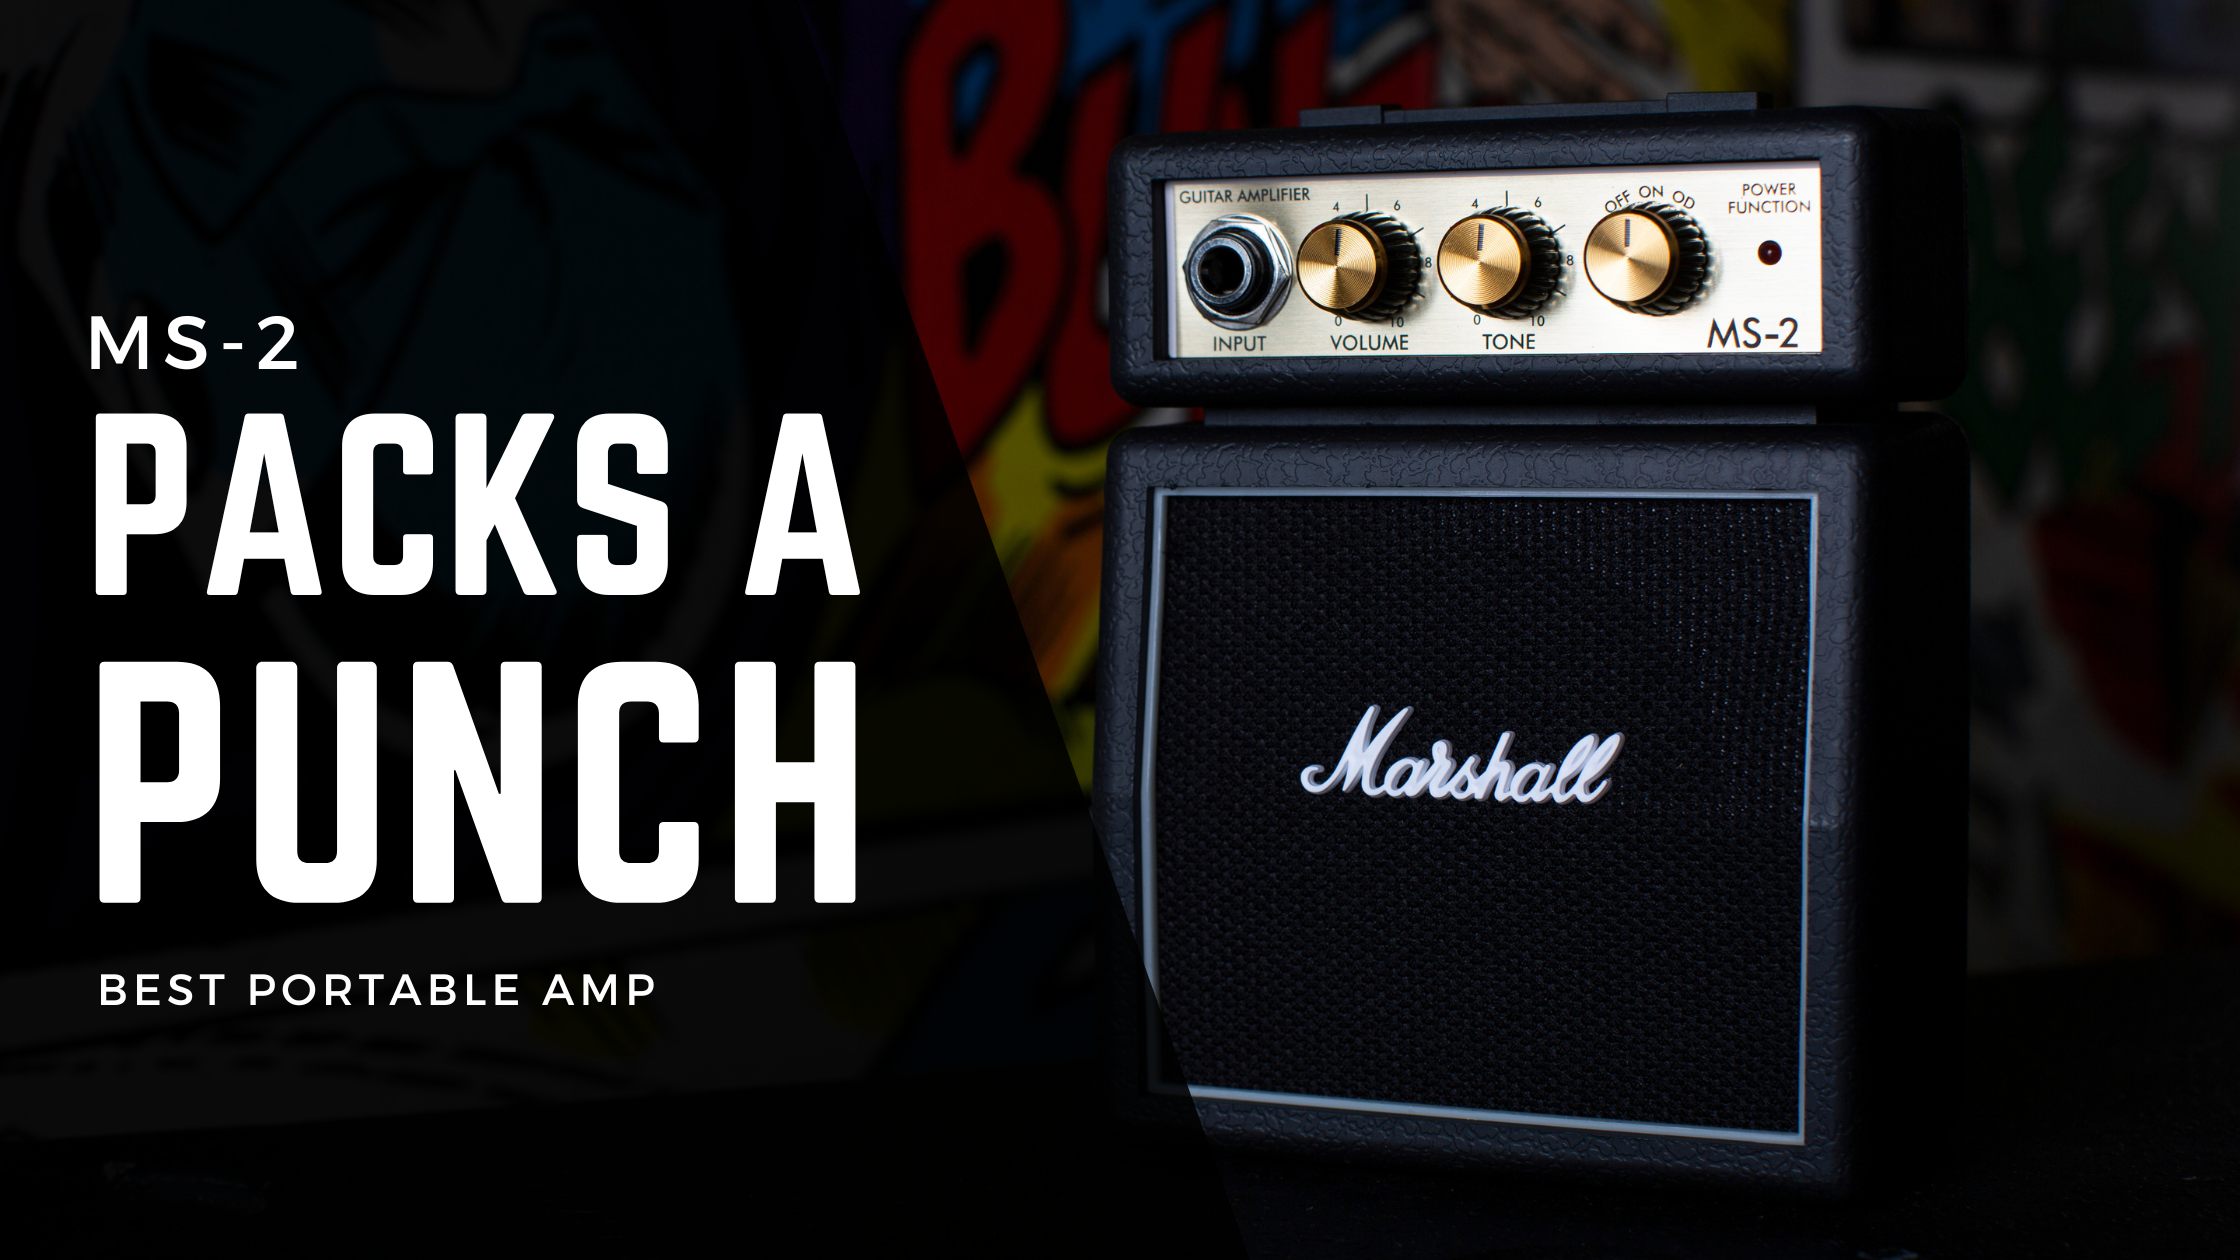 Get Big Sound From a Small Package With the Marshall MS-2 Micro Amp